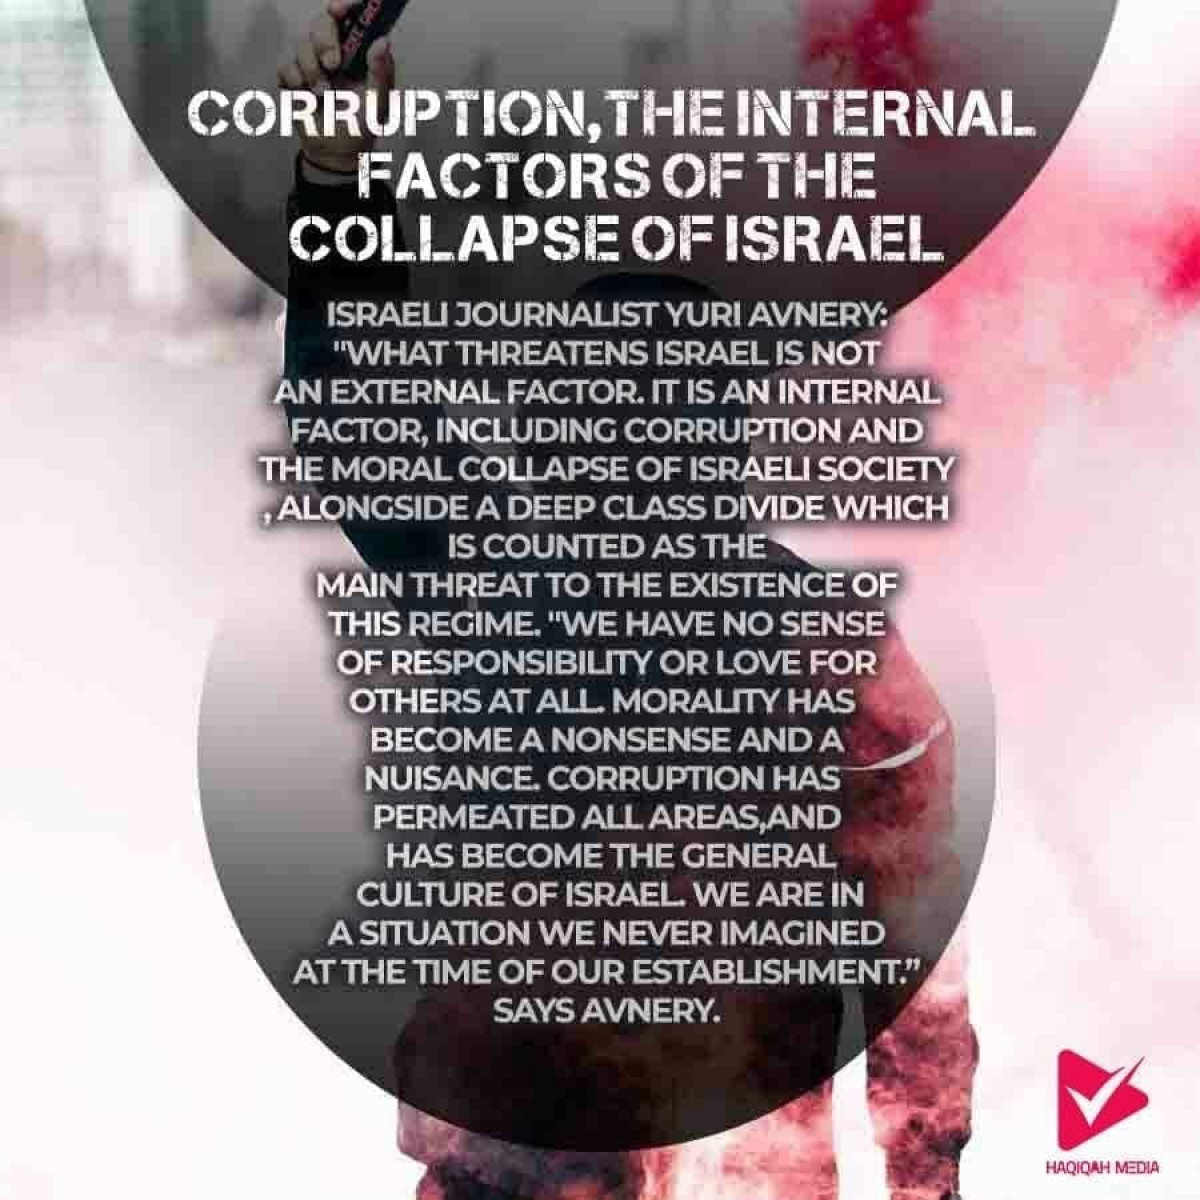 CORRUPTION, THE INTERNAL FACTORS OF THE COLLAPSE OF ISRAEL